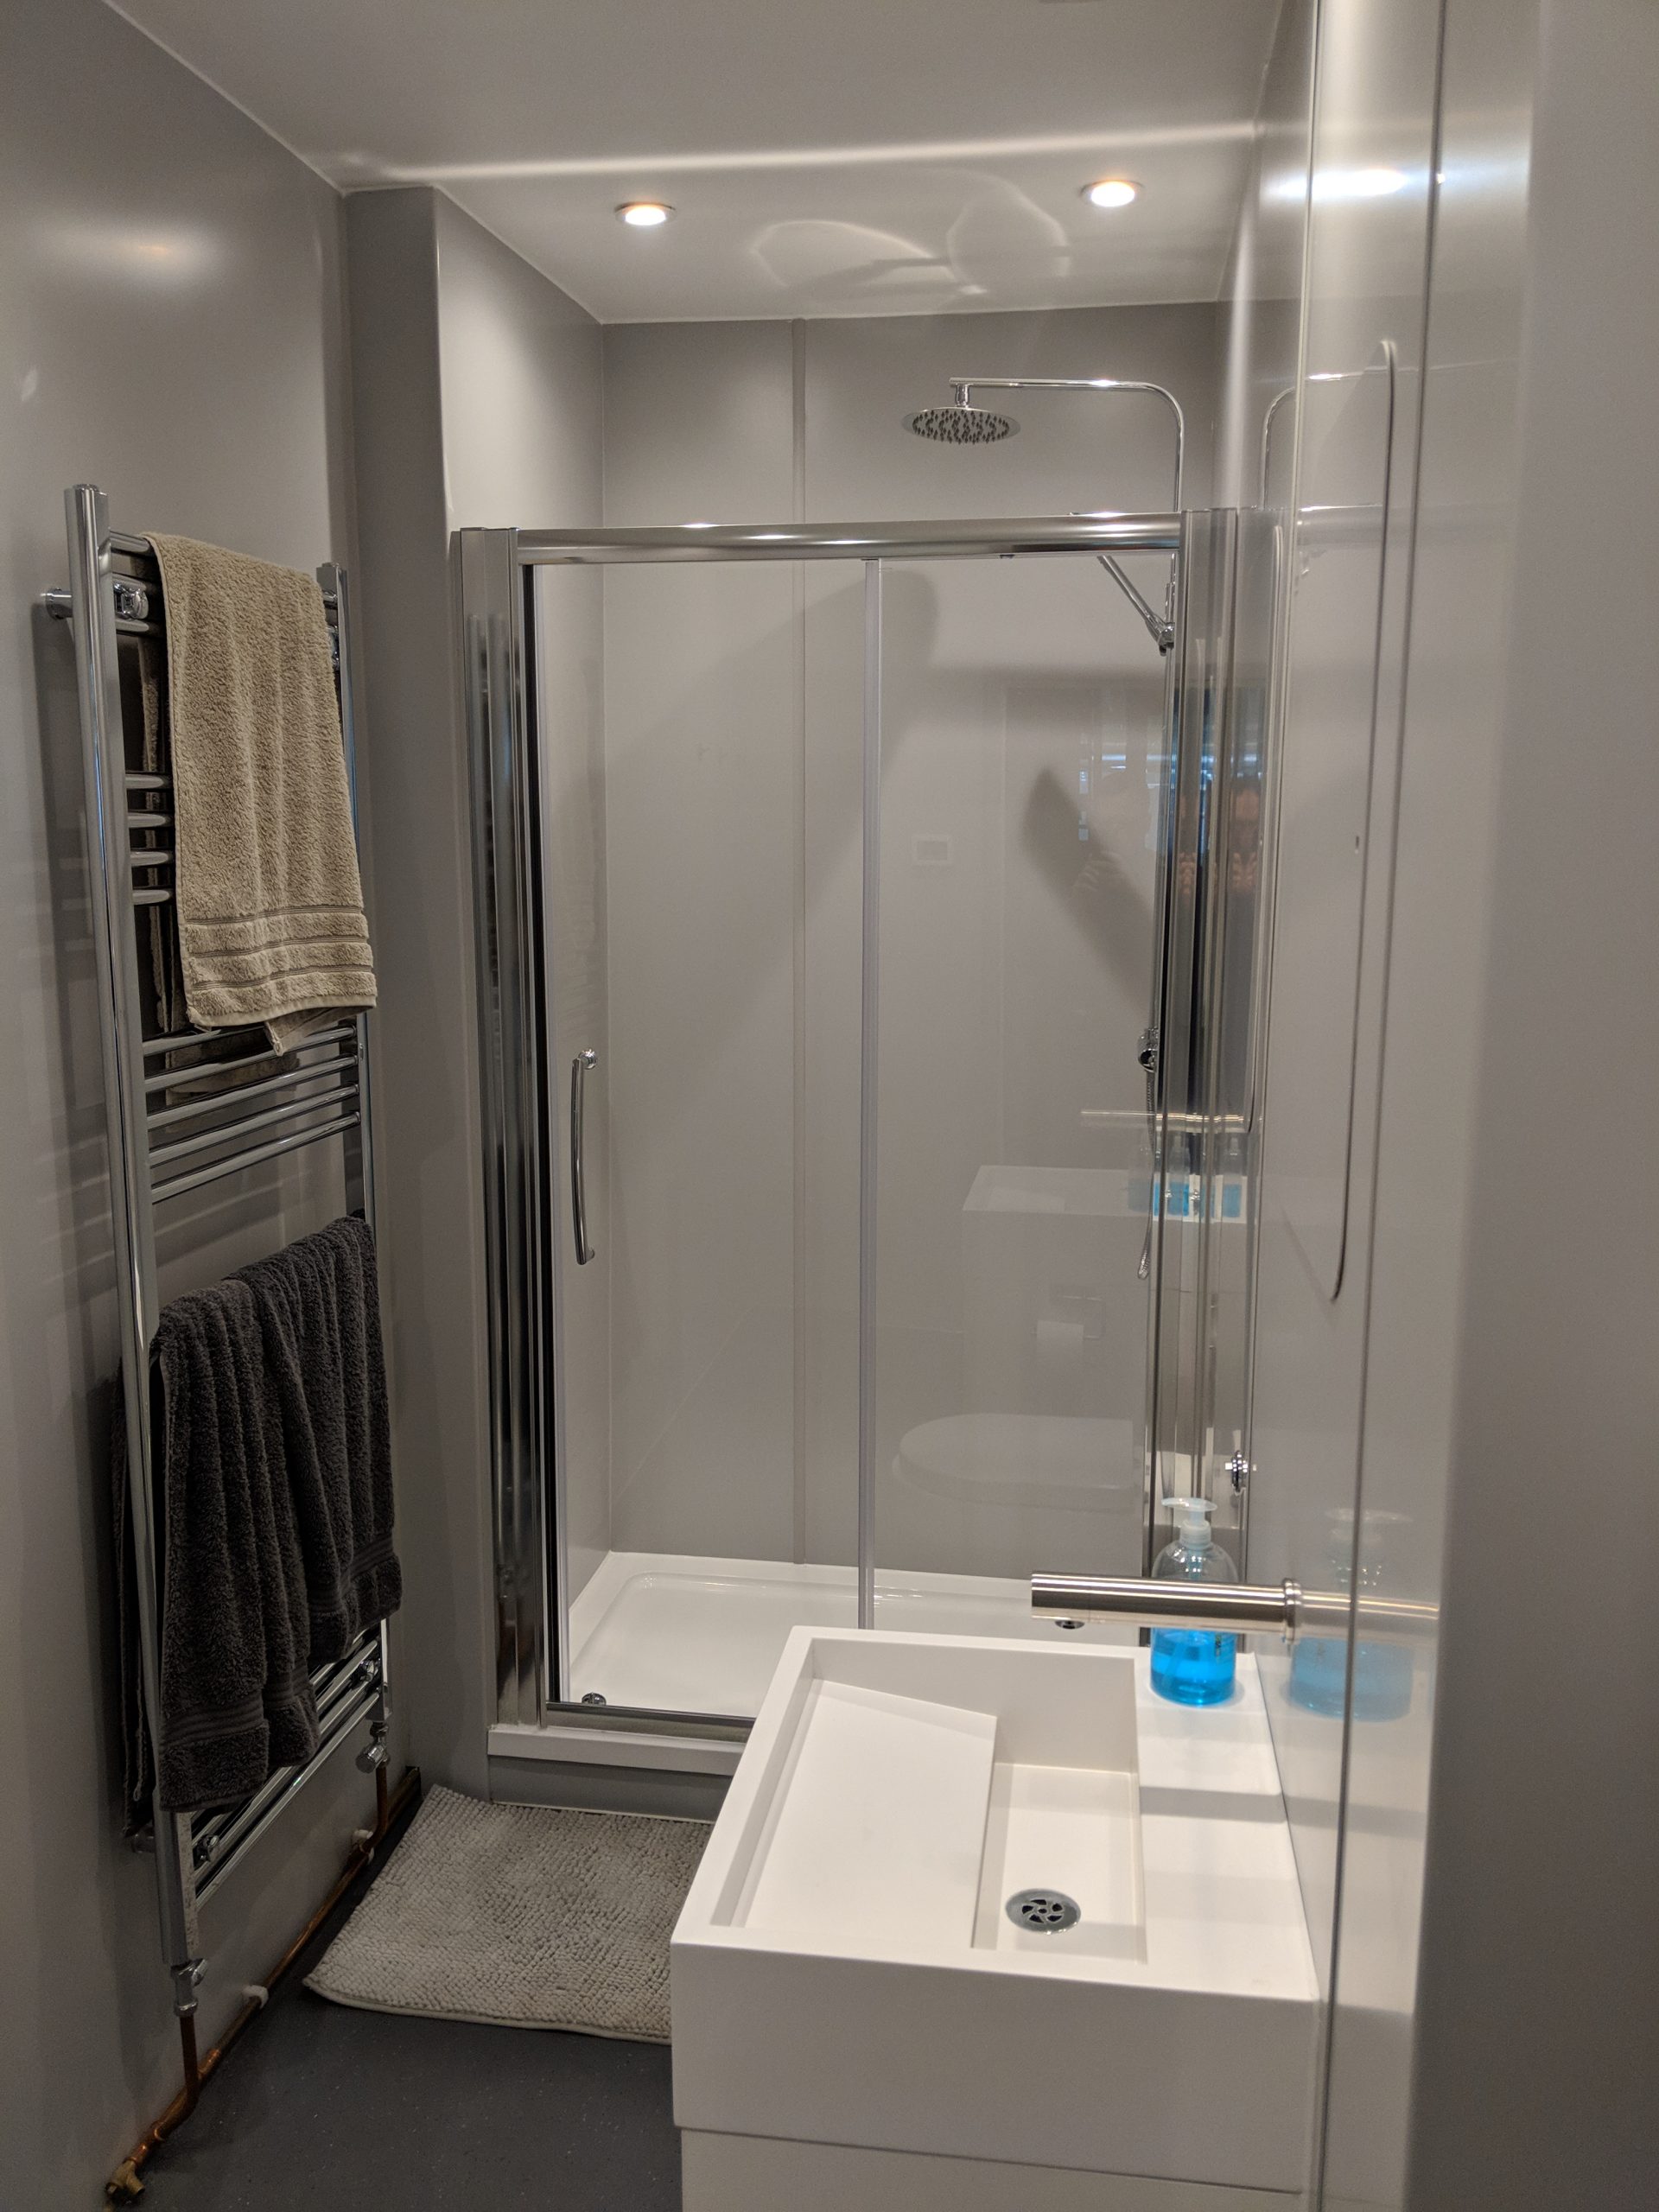 Example of shower room installed in a business using the grants.